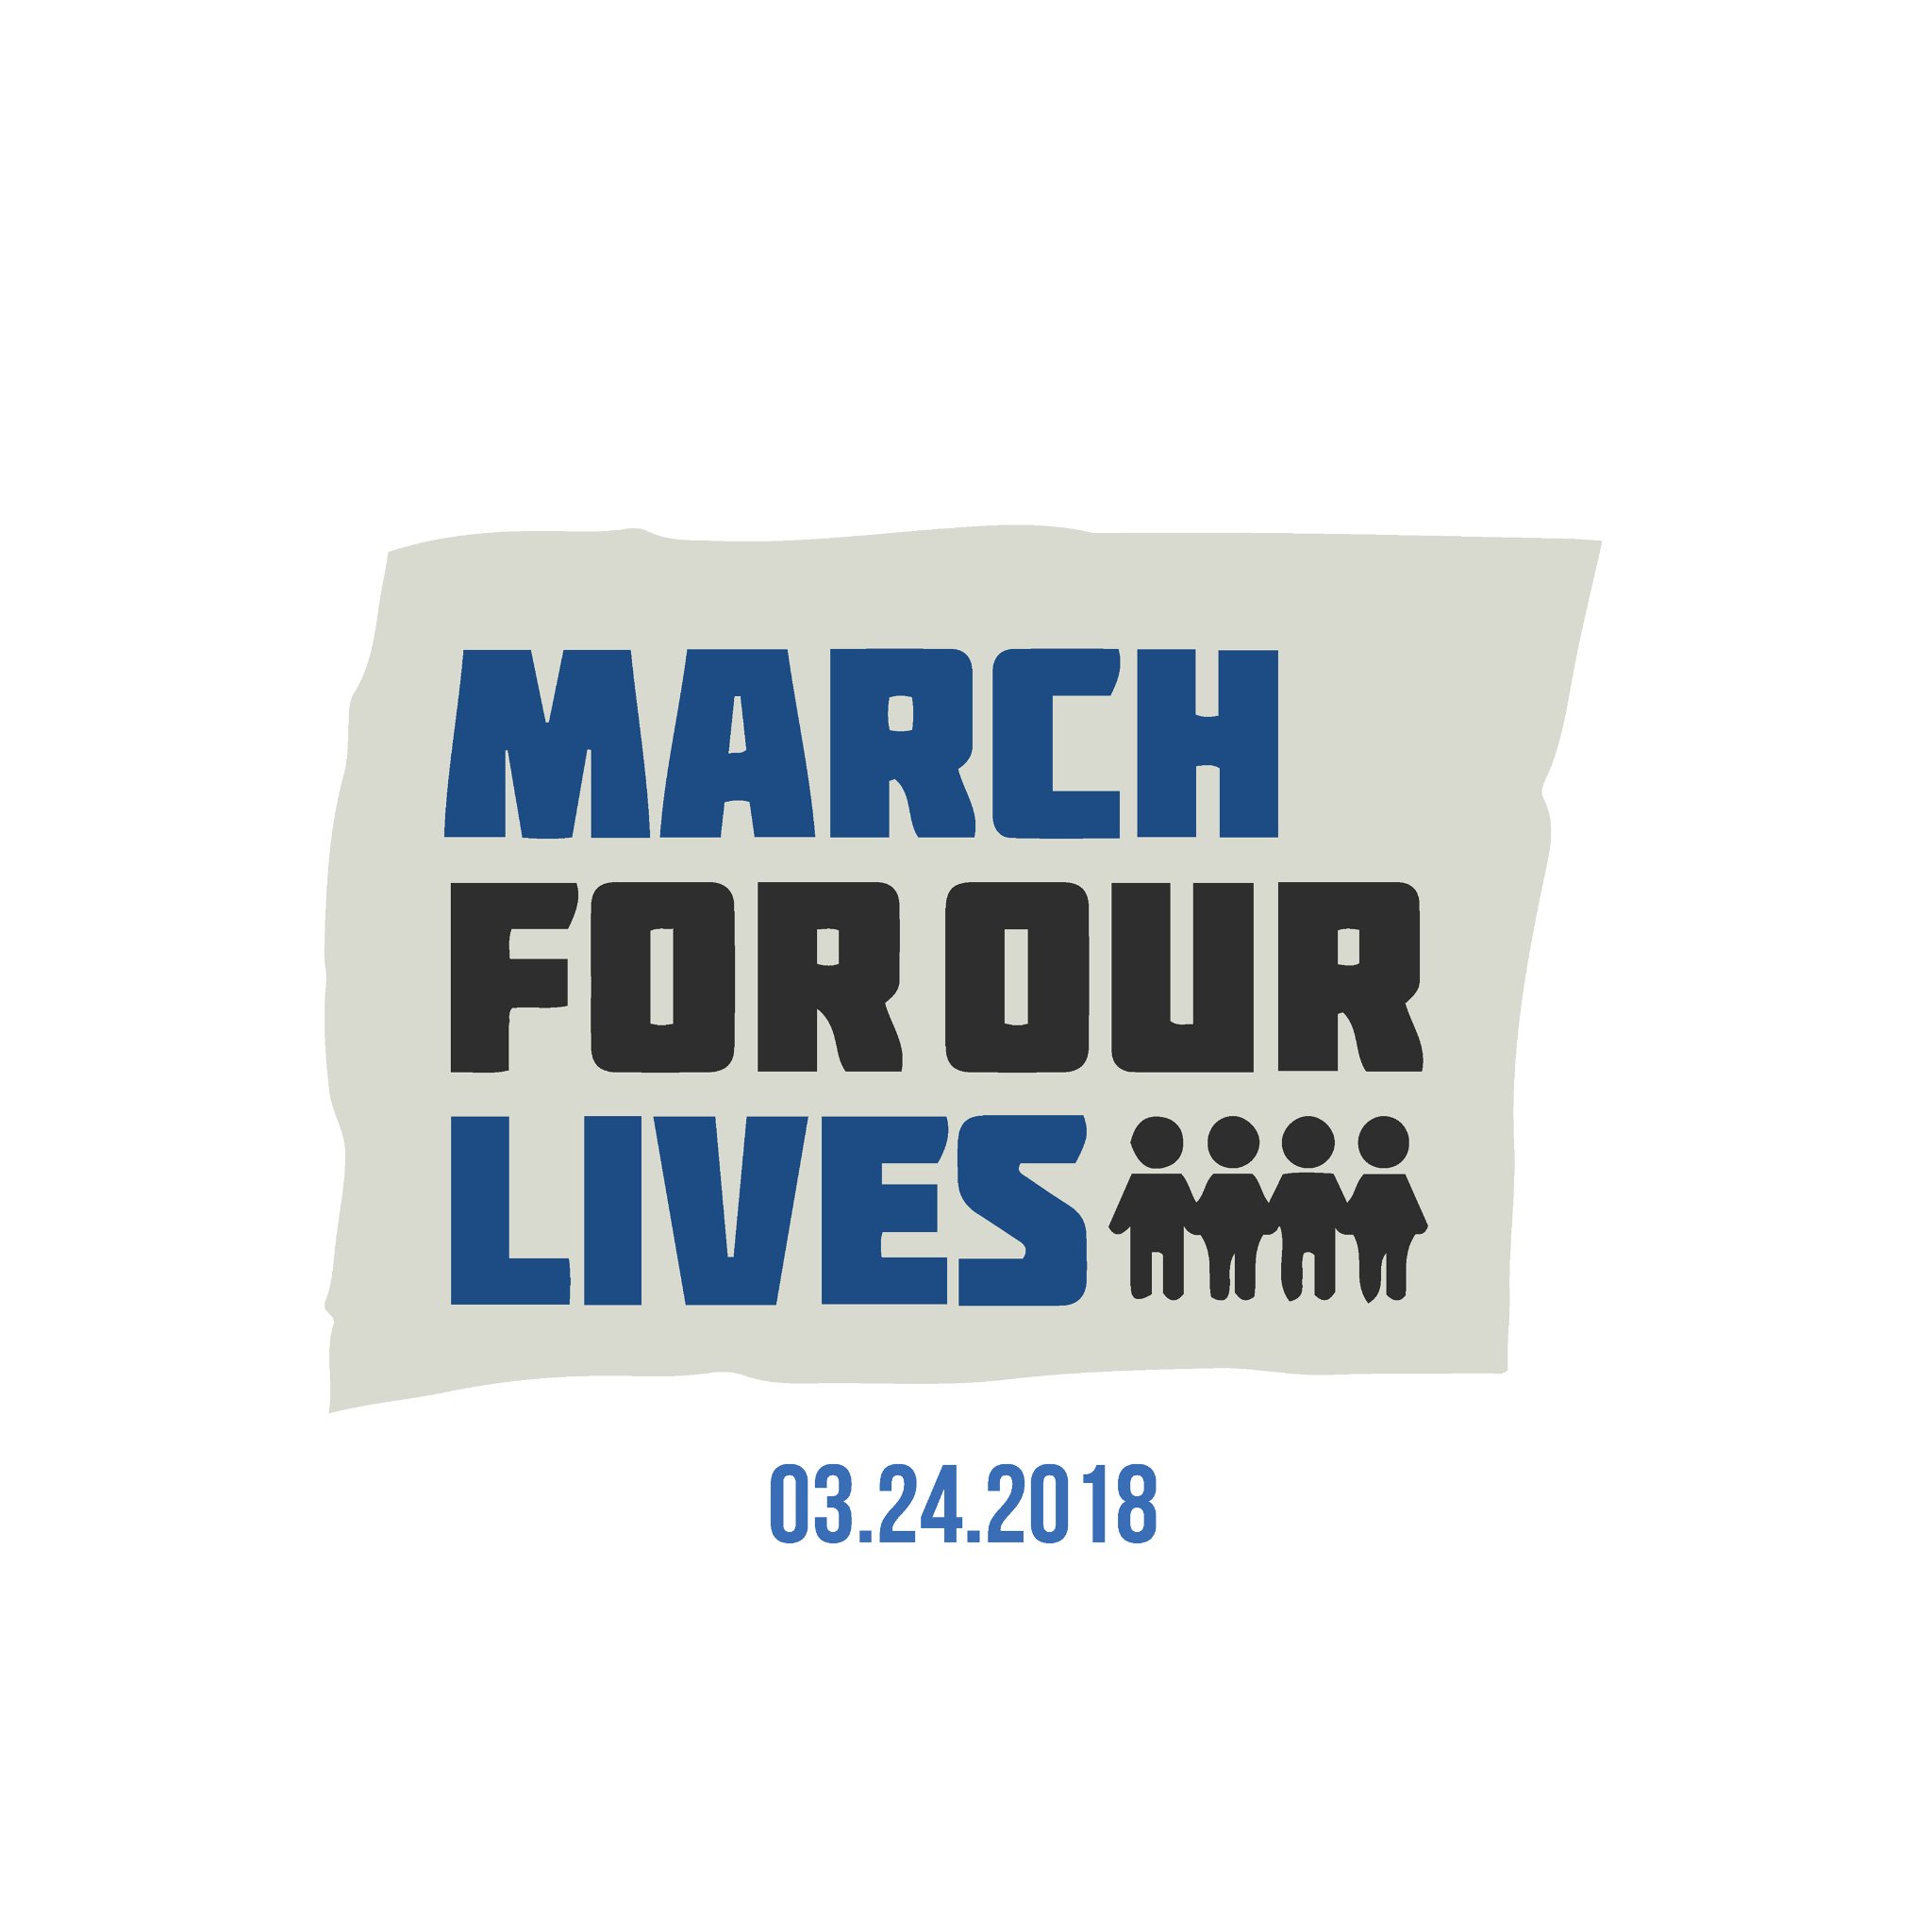 Hey everyone, help support our March and get an awesome tee at the same time. Click the below link to go to the website. If you don't want a tee, you can still